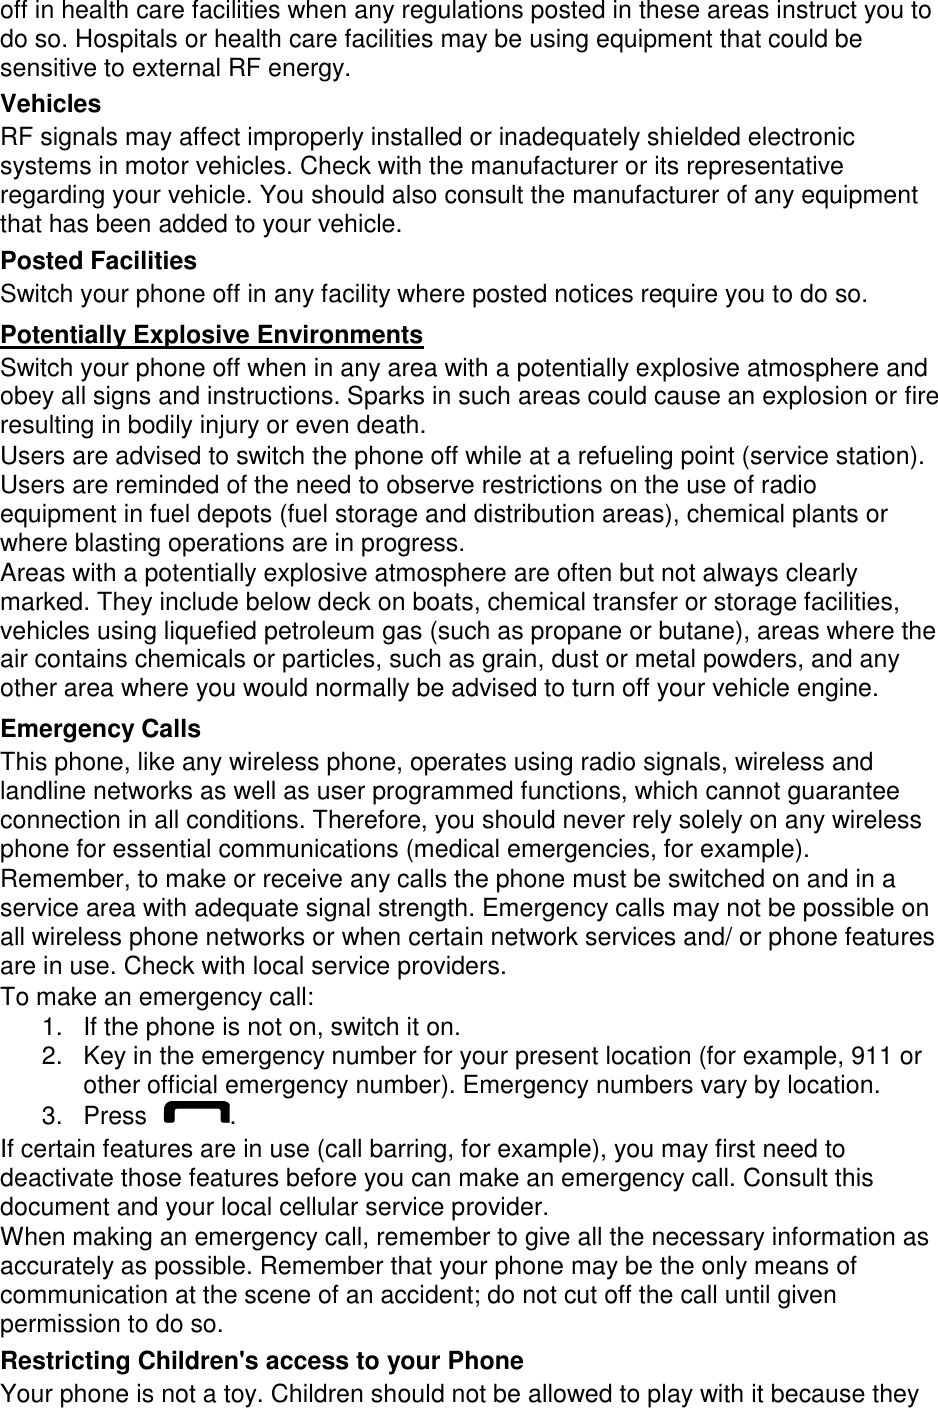 off in health care facilities when any regulations posted in these areas instruct you to do so. Hospitals or health care facilities may be using equipment that could be sensitive to external RF energy. Vehicles RF signals may affect improperly installed or inadequately shielded electronic systems in motor vehicles. Check with the manufacturer or its representative regarding your vehicle. You should also consult the manufacturer of any equipment that has been added to your vehicle. Posted Facilities Switch your phone off in any facility where posted notices require you to do so. Potentially Explosive Environments Switch your phone off when in any area with a potentially explosive atmosphere and obey all signs and instructions. Sparks in such areas could cause an explosion or fire resulting in bodily injury or even death. Users are advised to switch the phone off while at a refueling point (service station). Users are reminded of the need to observe restrictions on the use of radio equipment in fuel depots (fuel storage and distribution areas), chemical plants or where blasting operations are in progress. Areas with a potentially explosive atmosphere are often but not always clearly marked. They include below deck on boats, chemical transfer or storage facilities, vehicles using liquefied petroleum gas (such as propane or butane), areas where the air contains chemicals or particles, such as grain, dust or metal powders, and any other area where you would normally be advised to turn off your vehicle engine. Emergency Calls This phone, like any wireless phone, operates using radio signals, wireless and landline networks as well as user programmed functions, which cannot guarantee connection in all conditions. Therefore, you should never rely solely on any wireless phone for essential communications (medical emergencies, for example). Remember, to make or receive any calls the phone must be switched on and in a service area with adequate signal strength. Emergency calls may not be possible on all wireless phone networks or when certain network services and/ or phone features are in use. Check with local service providers. To make an emergency call: 1.  If the phone is not on, switch it on. 2.  Key in the emergency number for your present location (for example, 911 or other official emergency number). Emergency numbers vary by location. 3.  Press  . If certain features are in use (call barring, for example), you may first need to deactivate those features before you can make an emergency call. Consult this document and your local cellular service provider. When making an emergency call, remember to give all the necessary information as accurately as possible. Remember that your phone may be the only means of communication at the scene of an accident; do not cut off the call until given permission to do so. Restricting Children&apos;s access to your Phone Your phone is not a toy. Children should not be allowed to play with it because they 